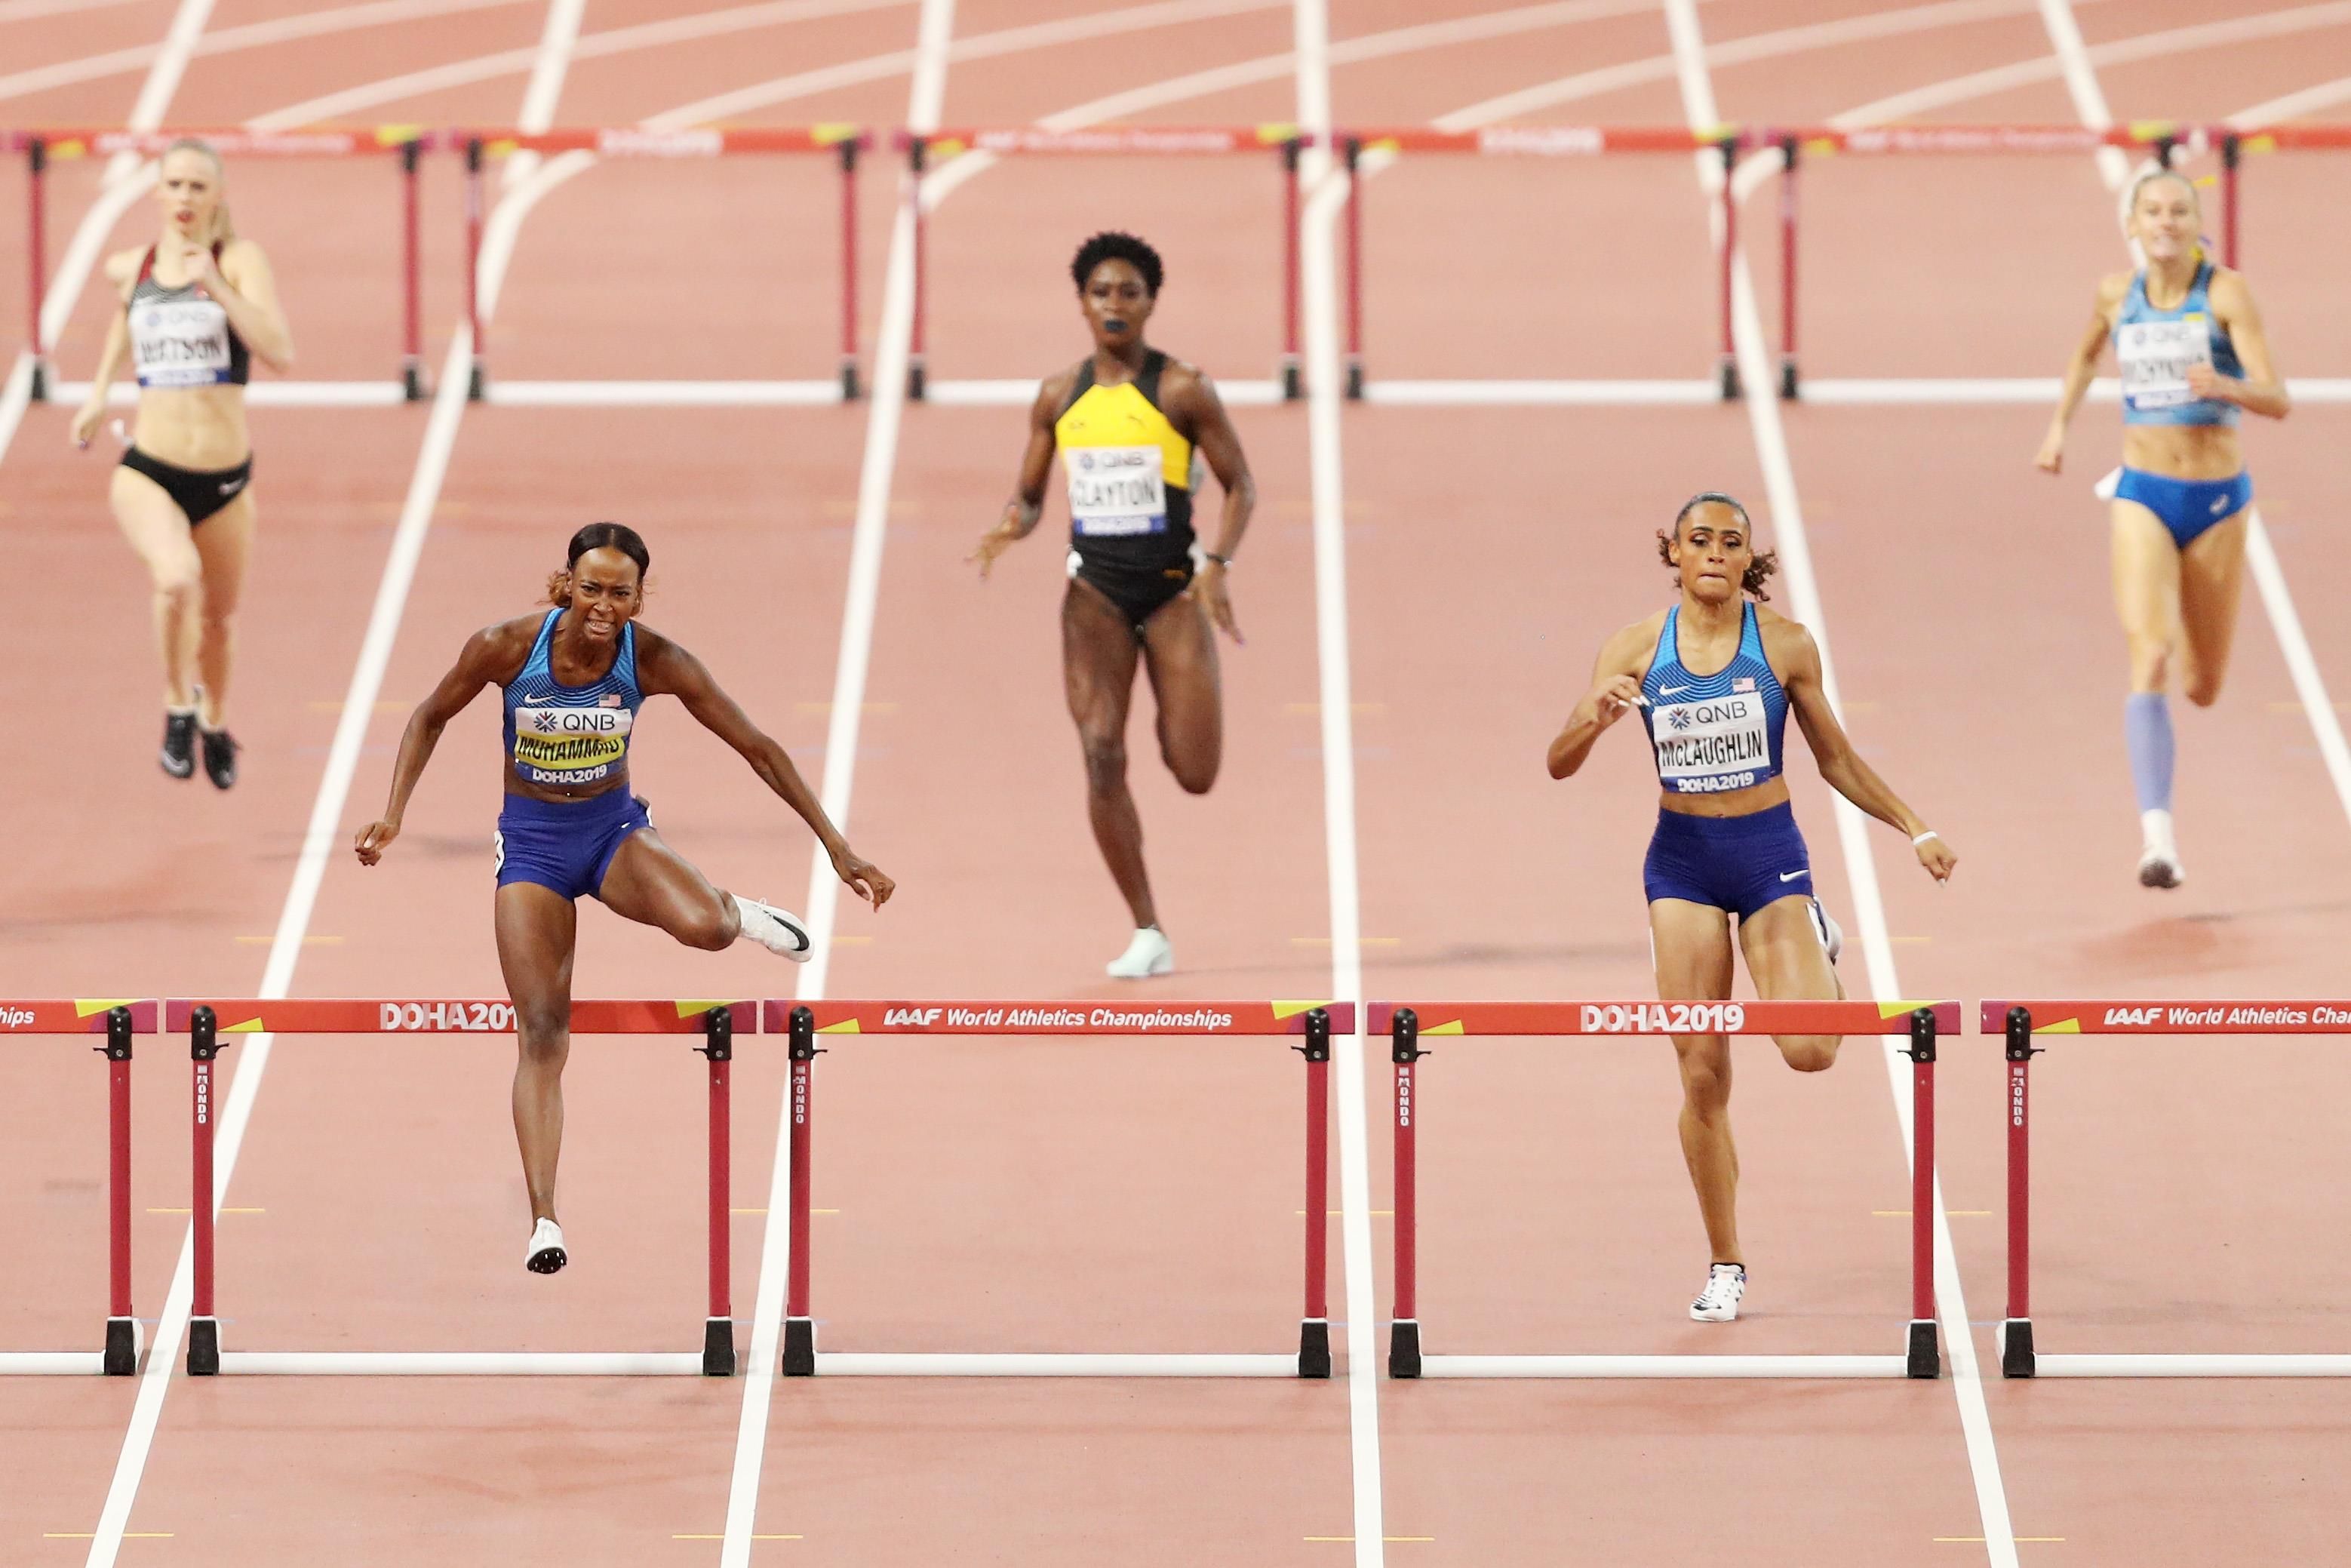 Four decades of influential women at the World Athletics Championships, SERIES